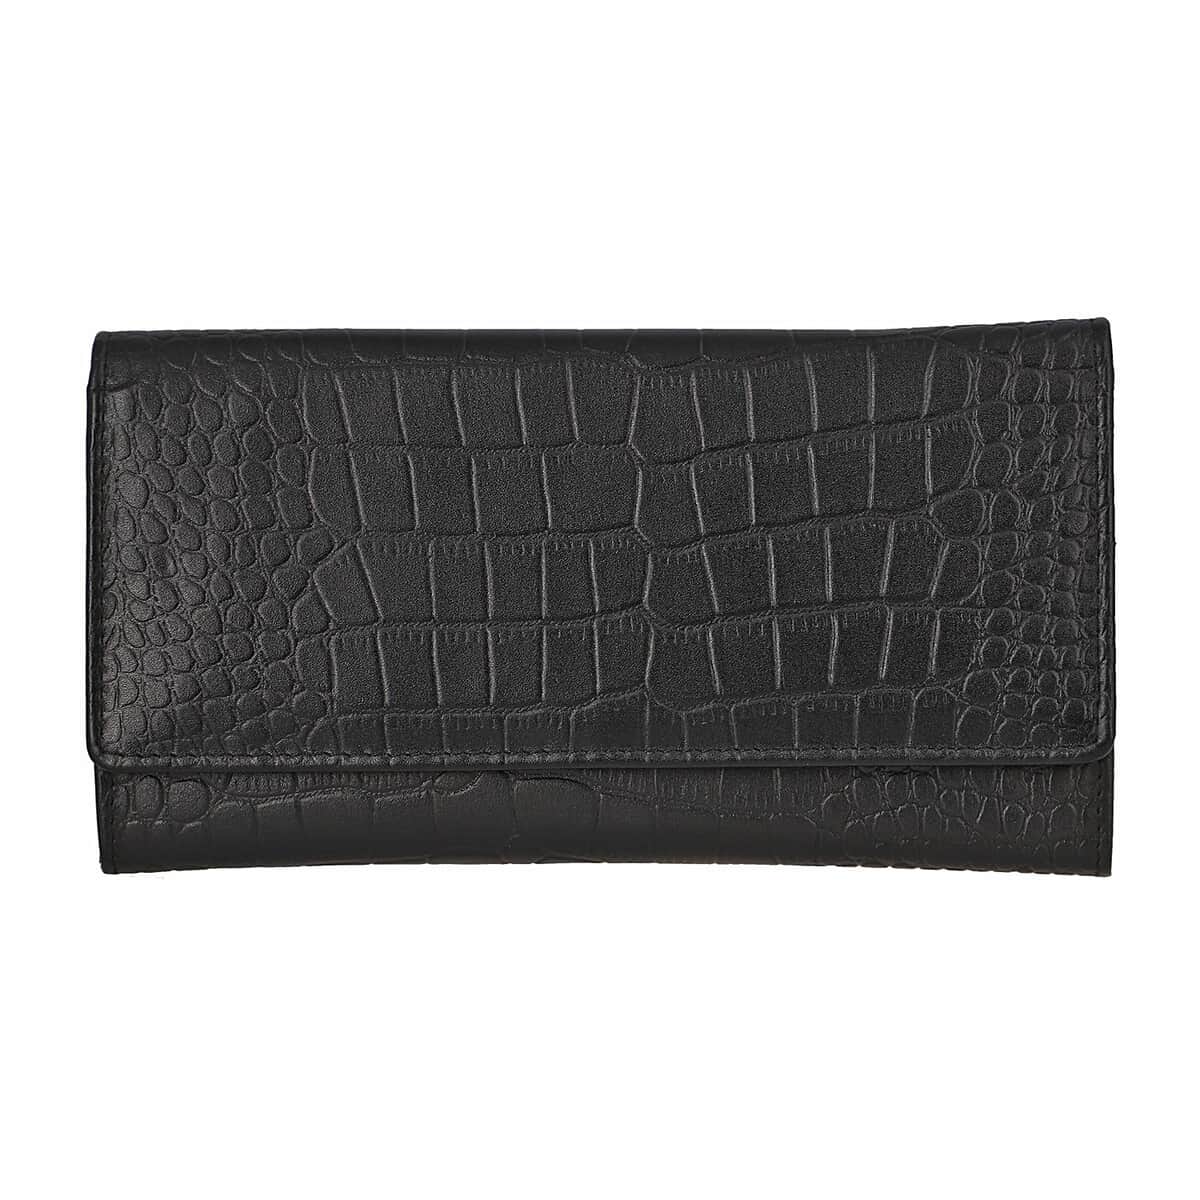 "100% Genuine Leather Wallet SIZE: 7.5(L)x4.5(W)x0.5(H) inches COLOR: Black" image number 0